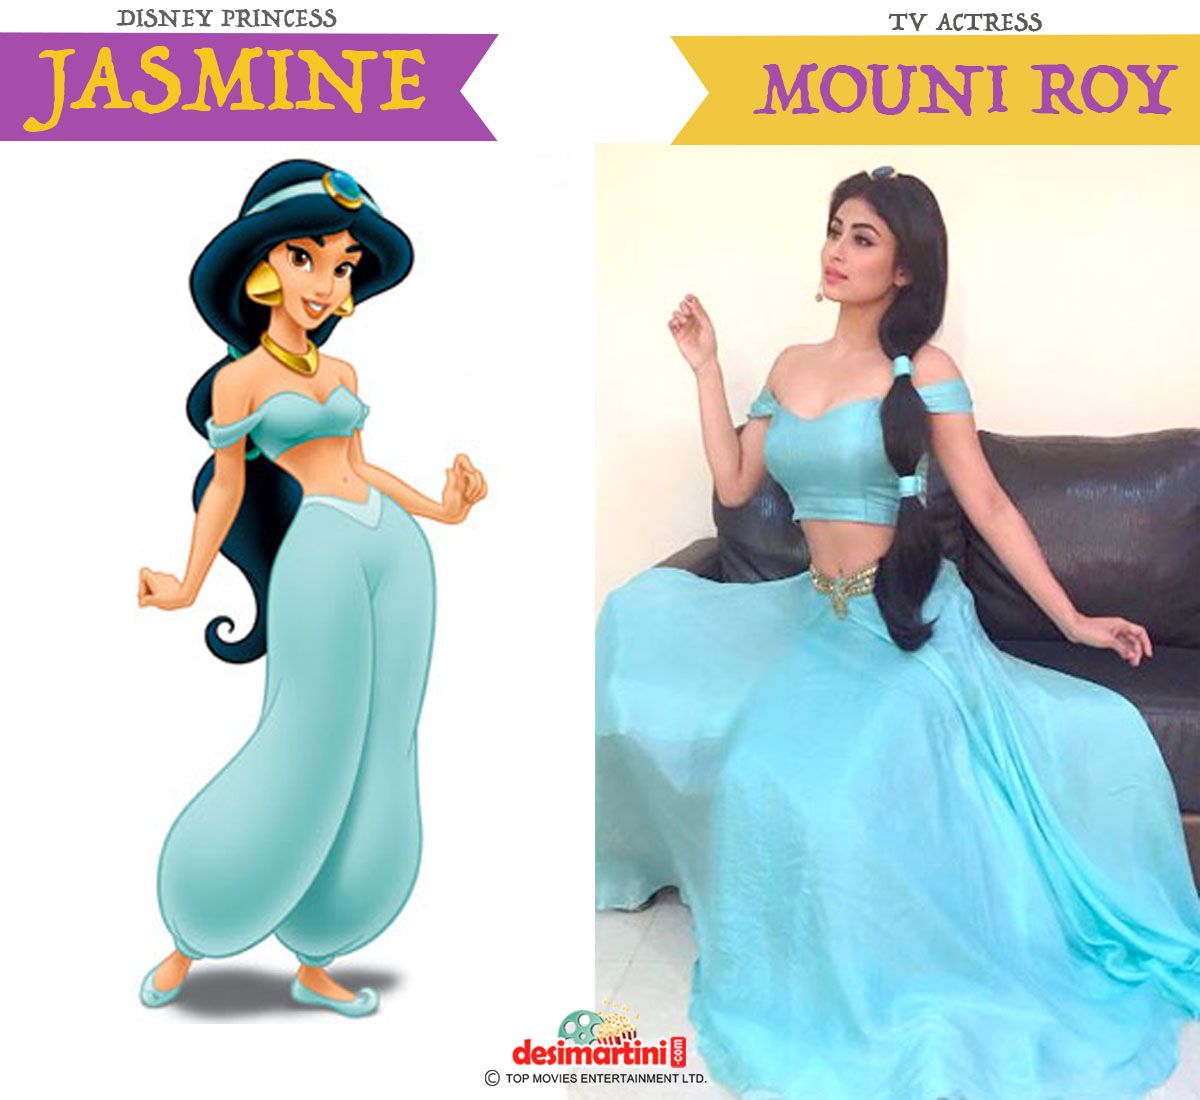 After Mouni Roy, These TV Actresses Can Mesmerise You As Disney Princesses!